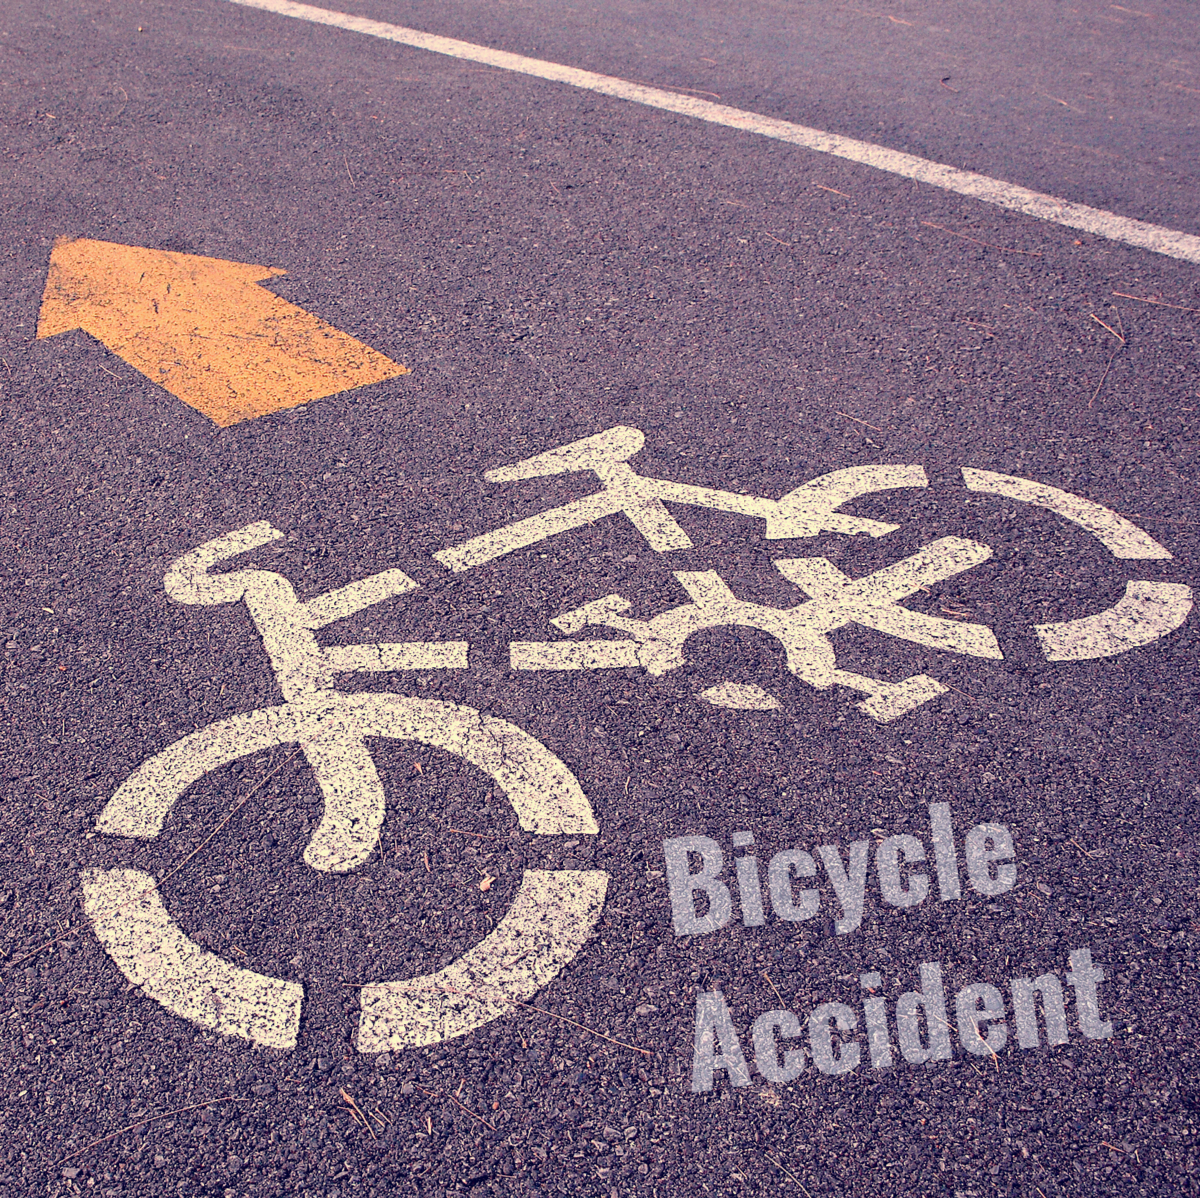 Martinez Fatal Bicycle Accident Arnold Drive Near Sundance Place